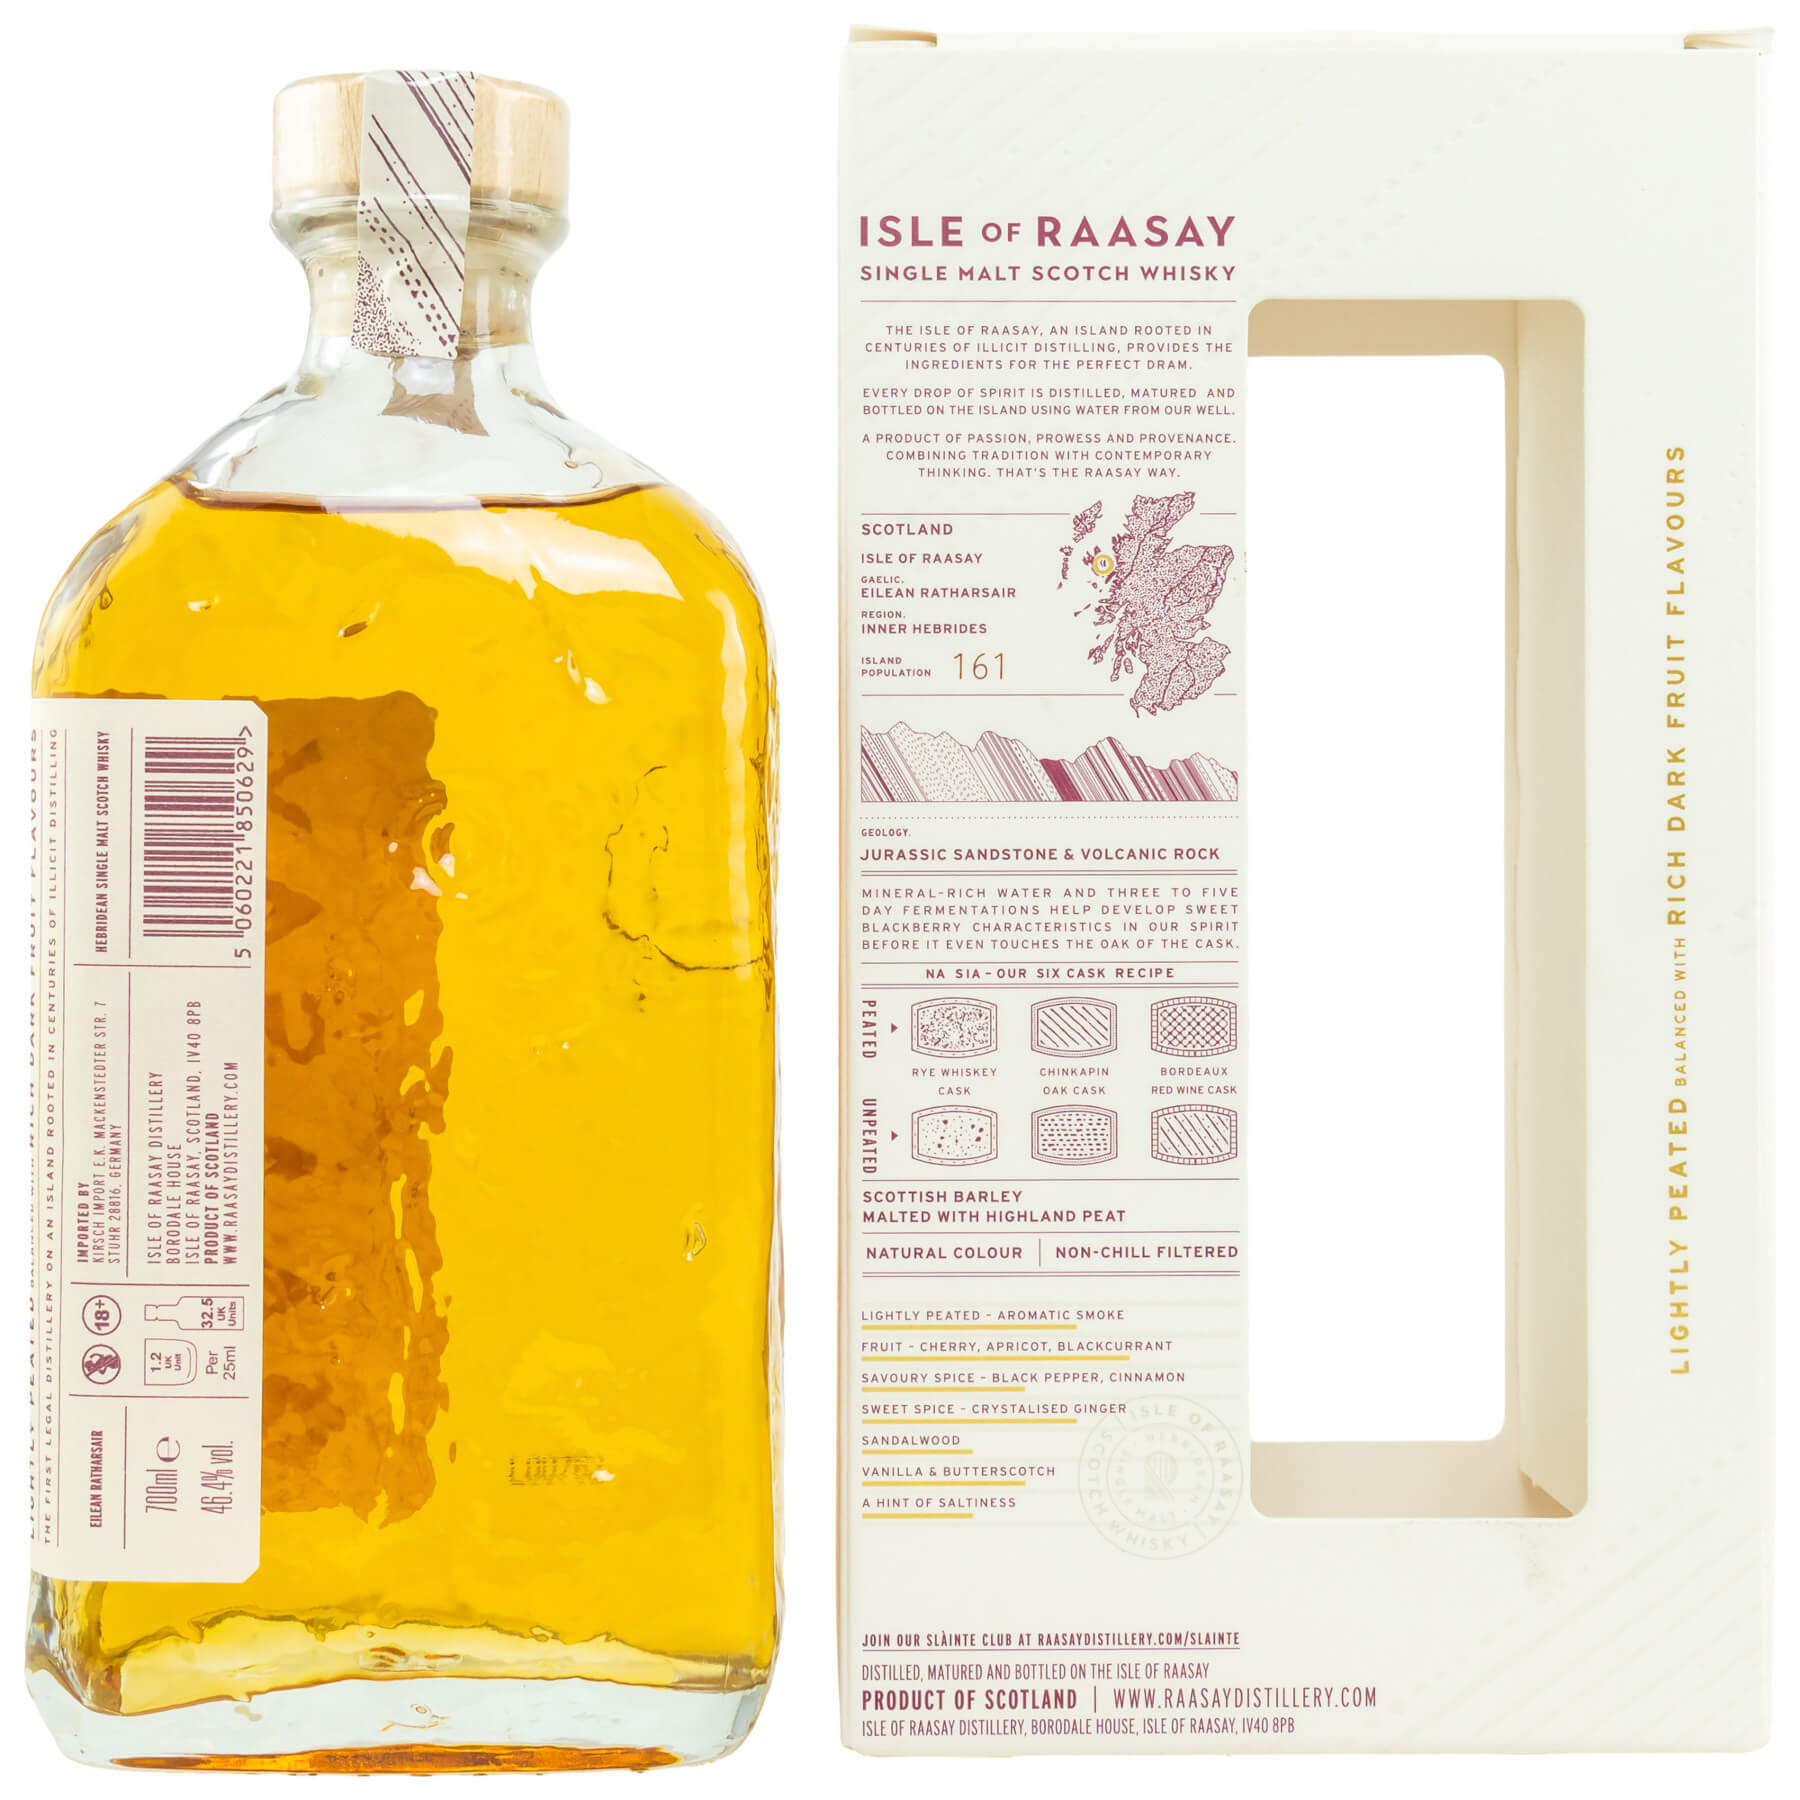 Flasche und Verpackung Isle of Raasay Single Malt Whisky Lightly Peated Batch R-01.1 Rückseite